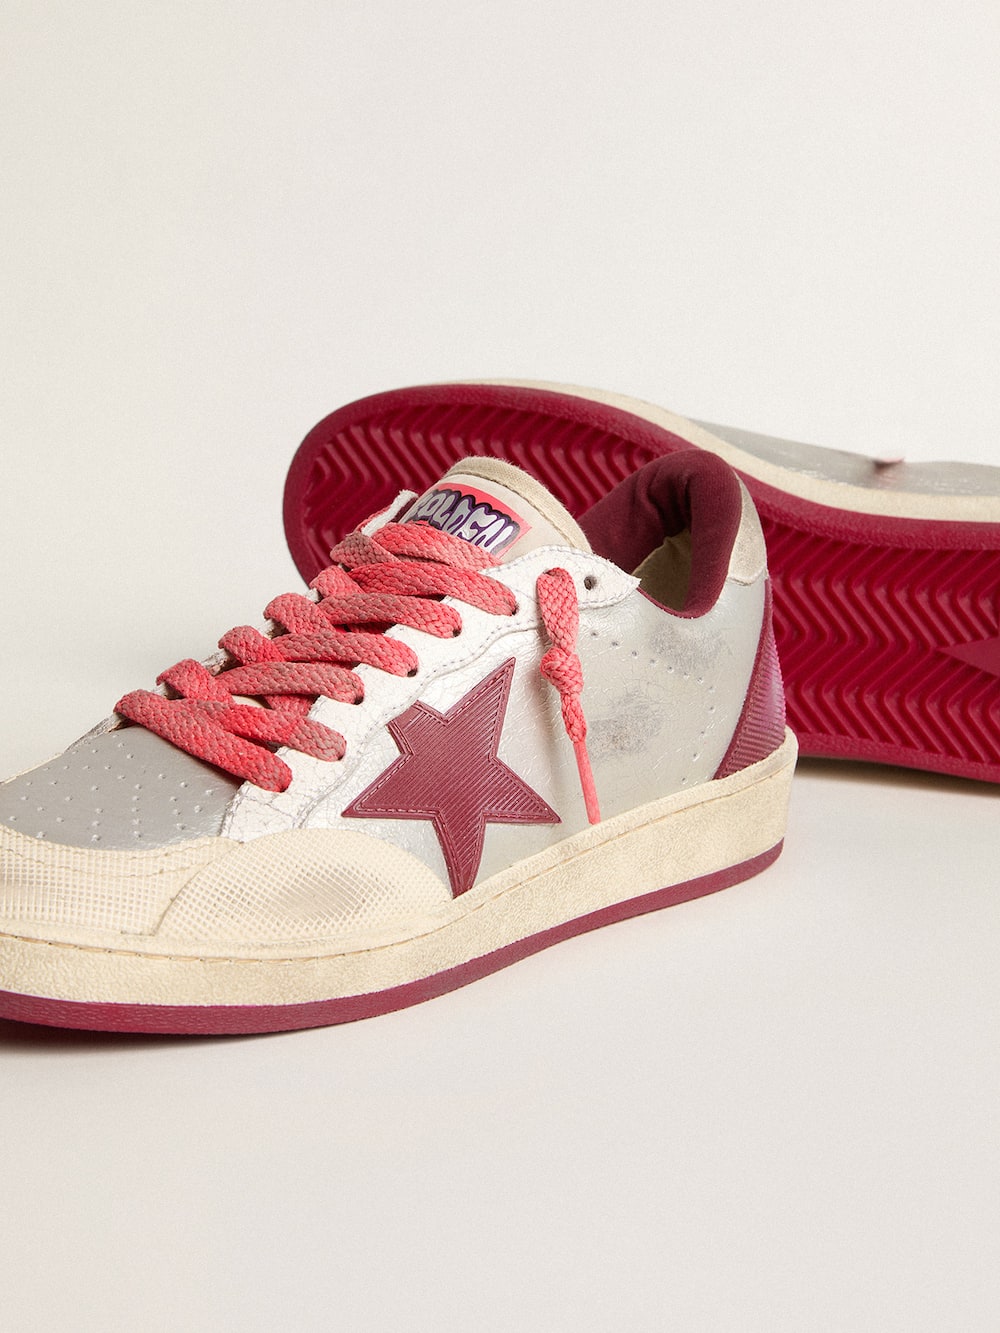 Golden Goose - Ball Star Pro Donna in pelle argento crackle con stella bordeaux in 